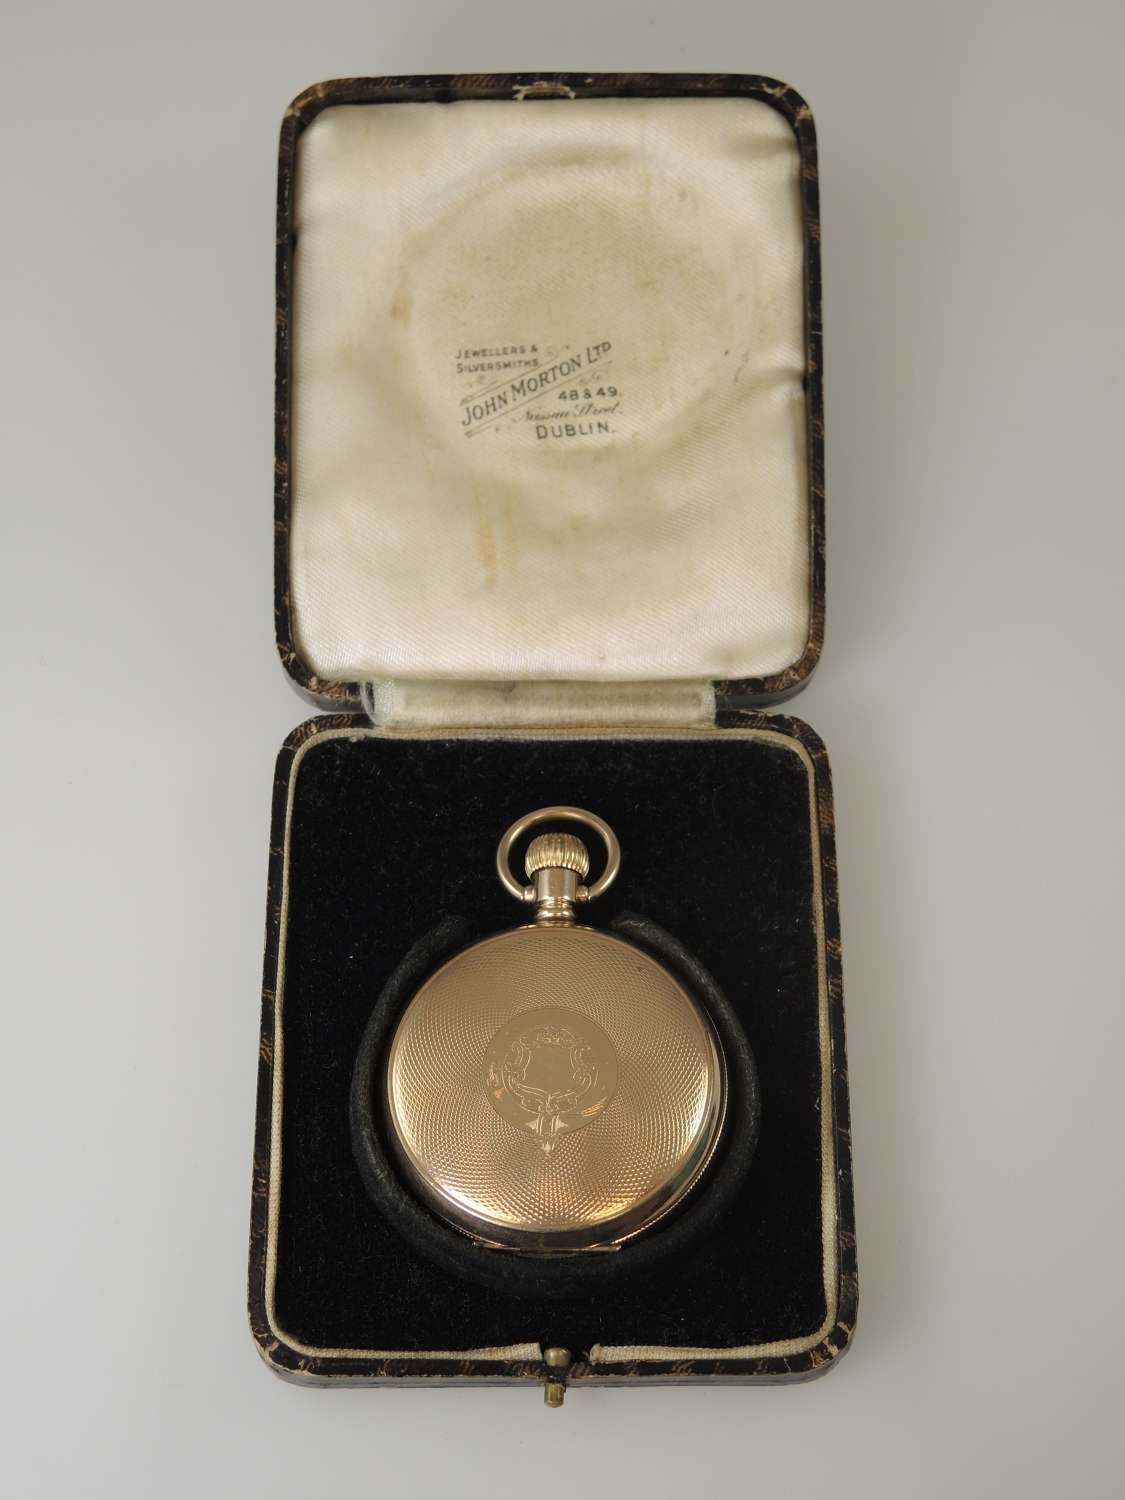 MINT gold plated full hunter pocket watch by Elgin 1929